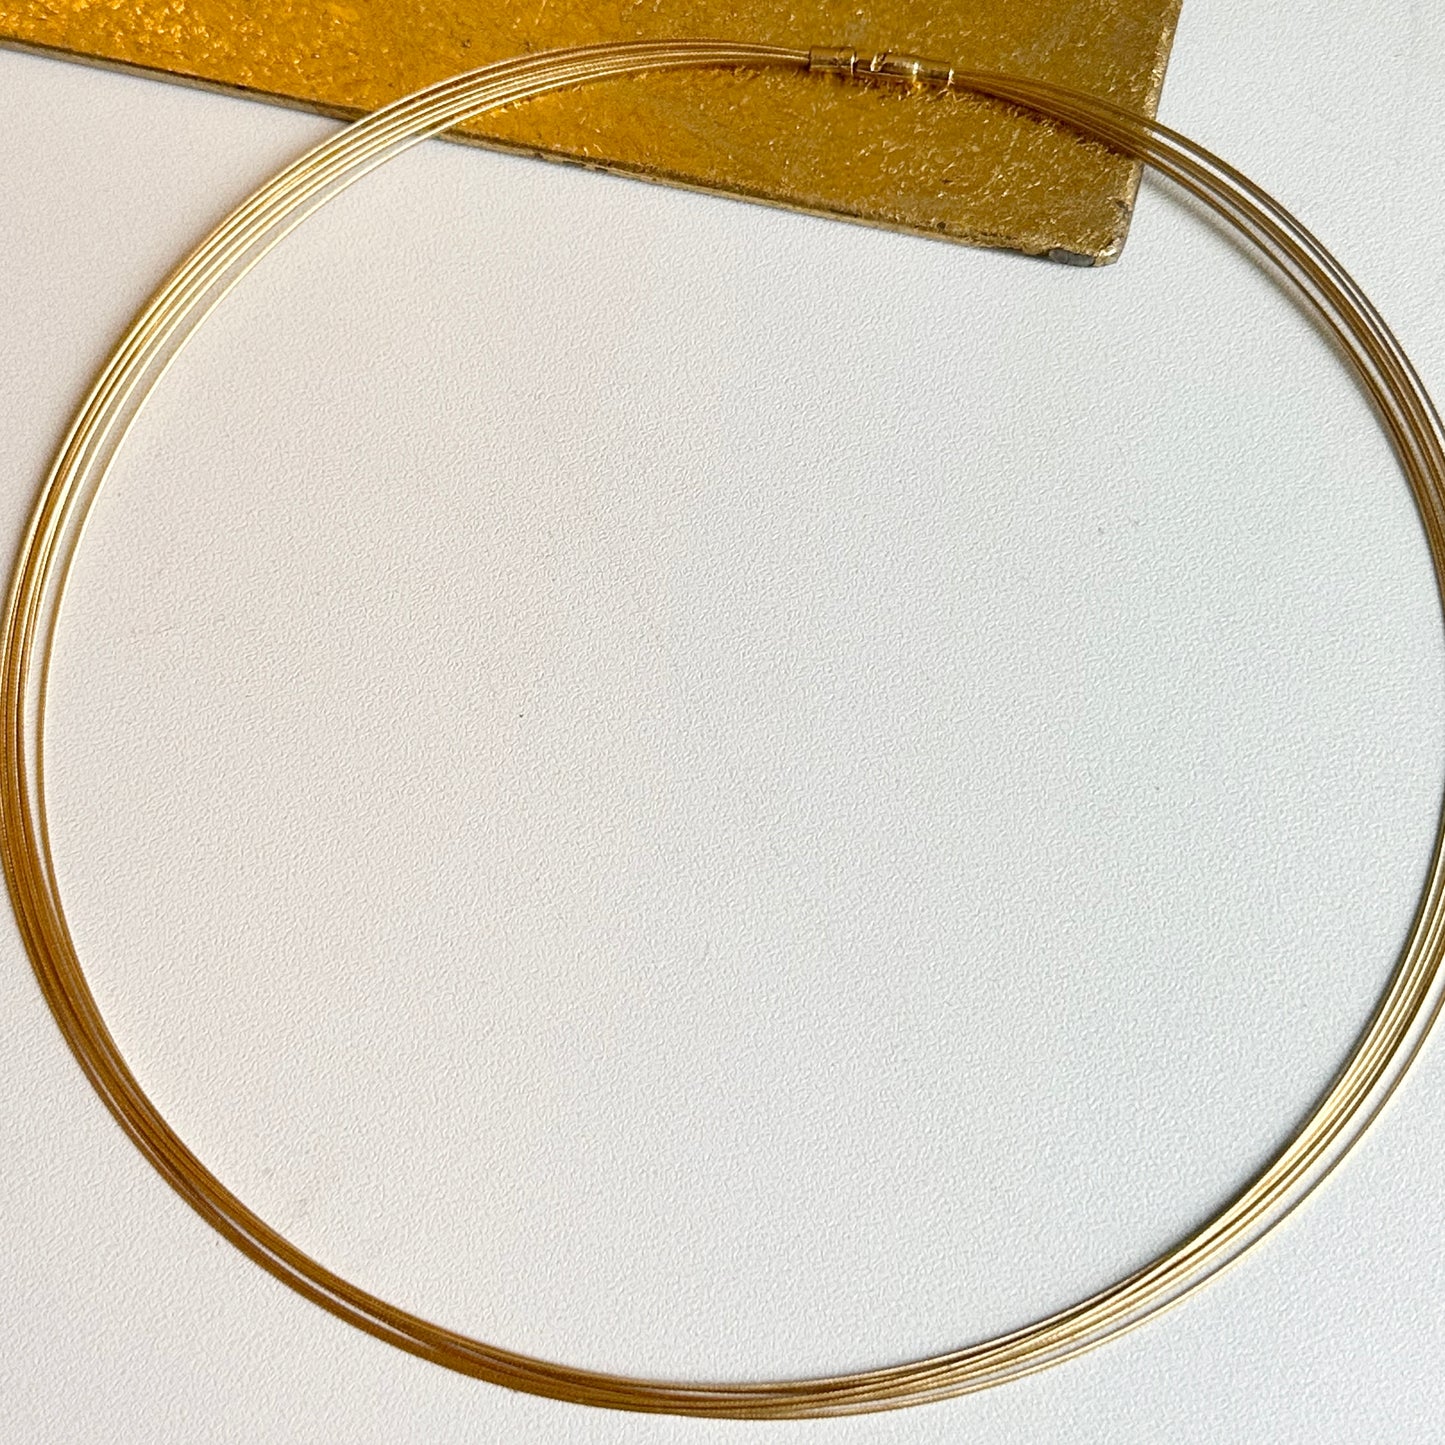 18KT Yellow Gold 7-Strand Cable Wire Collar Necklace